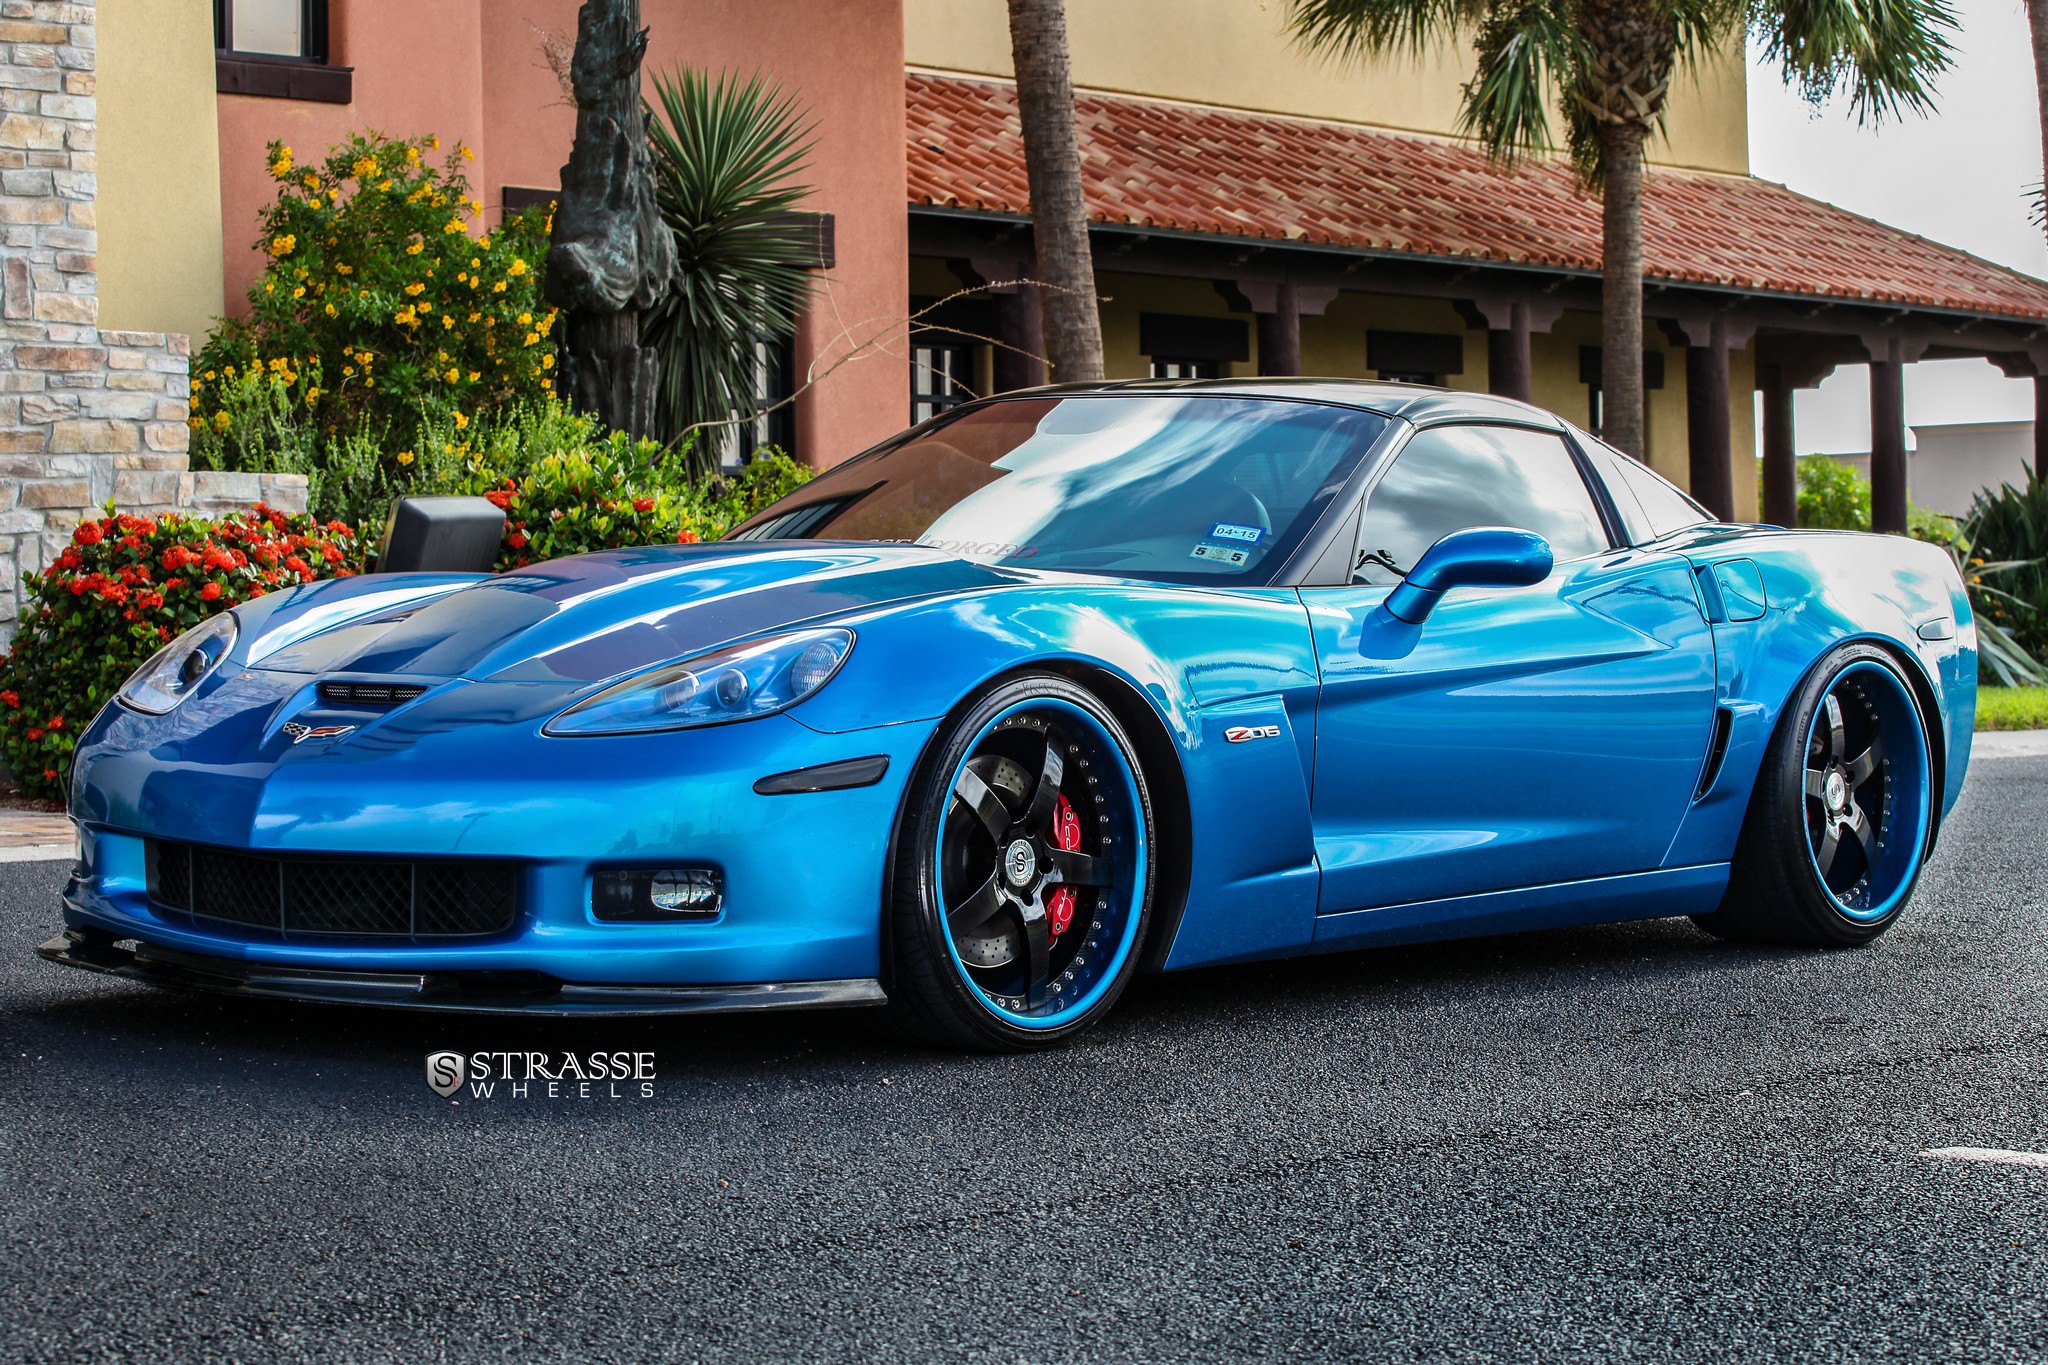 Aftermarket Halo Headlights on Blue Chevy Corvette - Photo by Strasse Forged